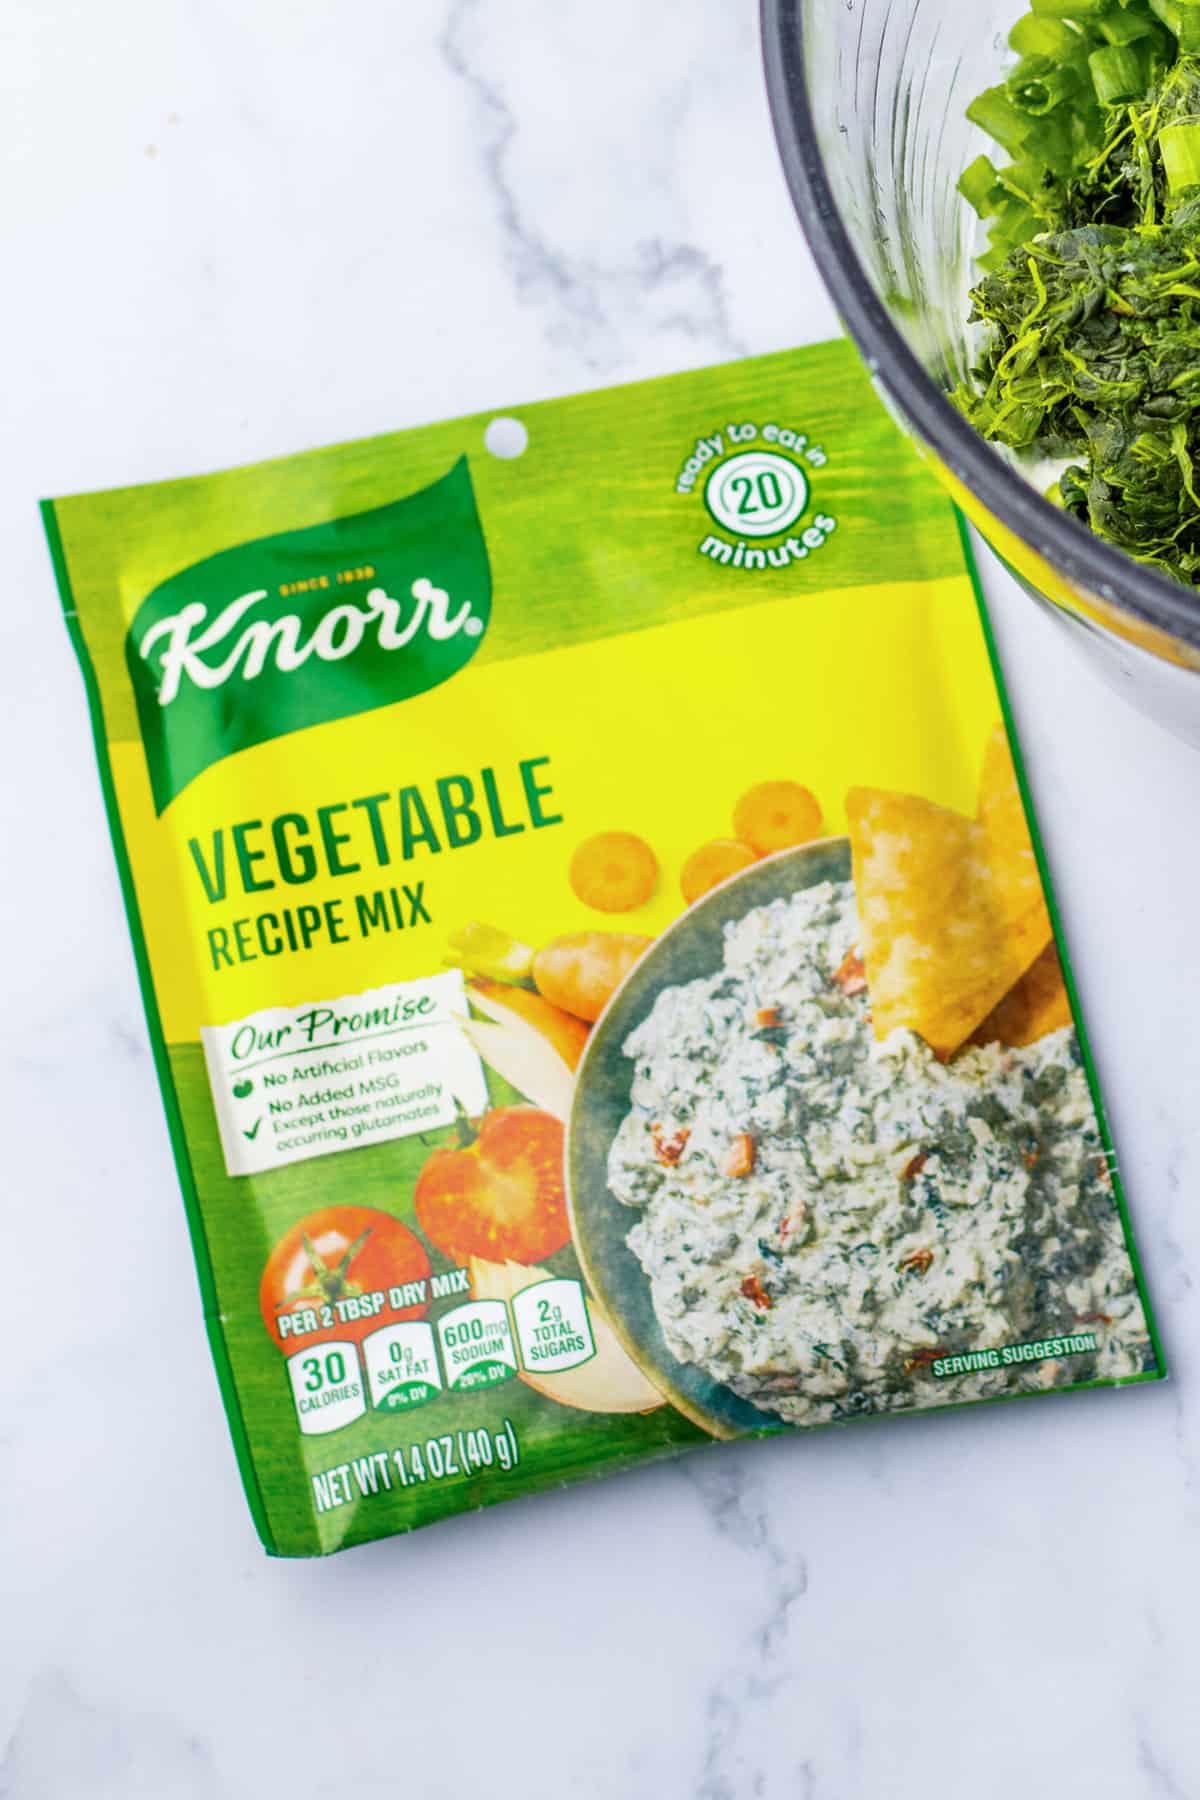 Knorr vegetable recipe mix packet with picture of spinach dip and chips on it.